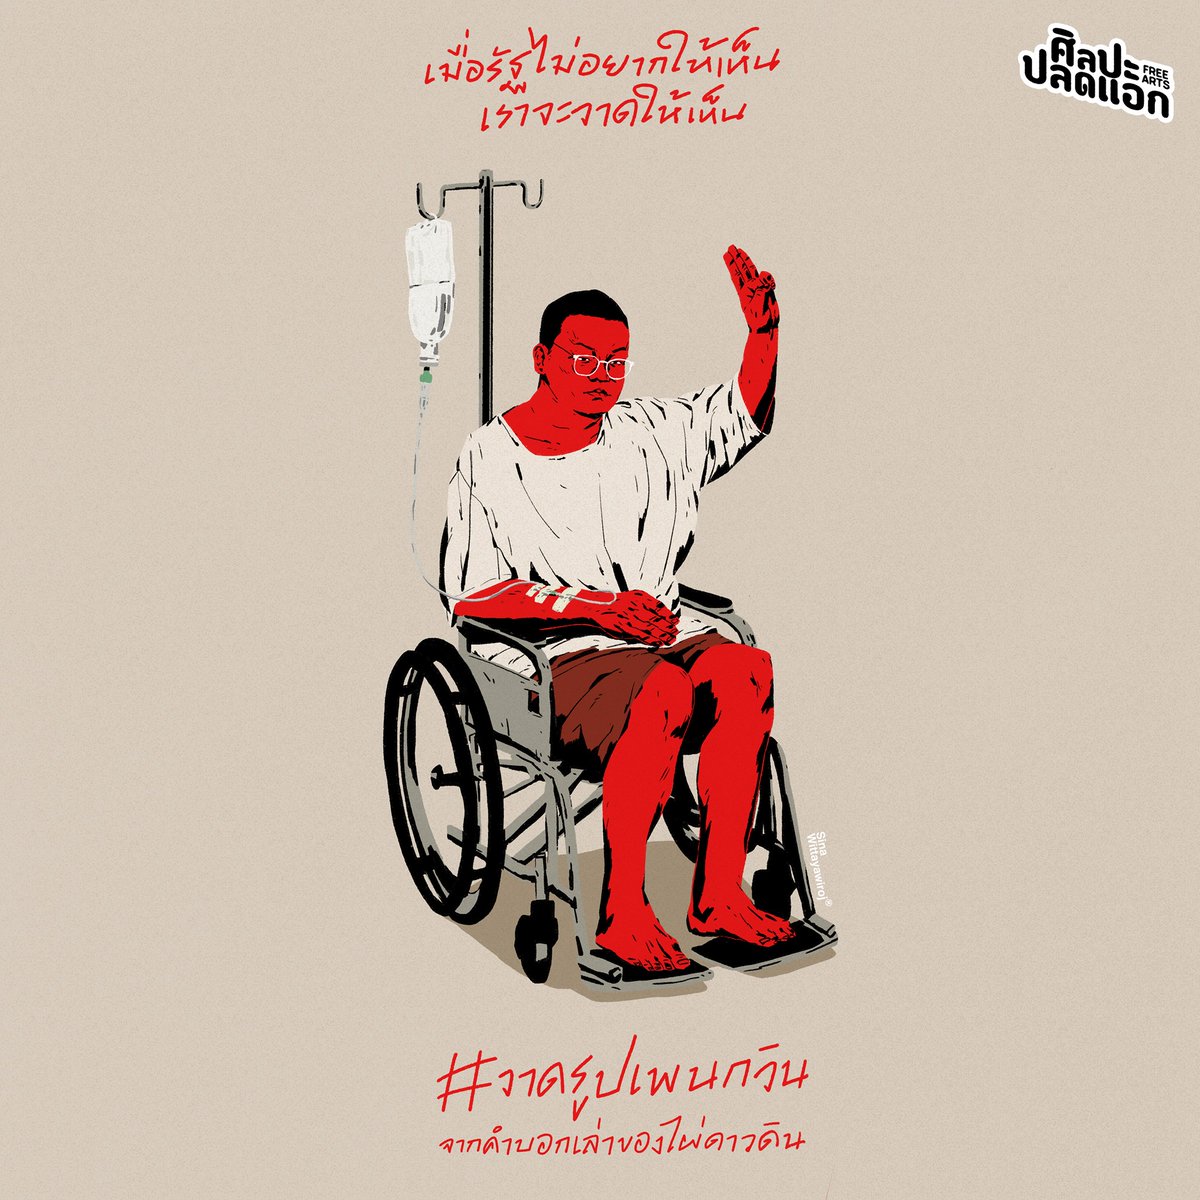 He was arrested on 9 February 2021. All of his bail's requests were denied. Thus, since March 15 he was on hunger strike for the right to bail. He is now on his 45th days of hunger strike and his condition is worsen.  #saveเพนกวิน